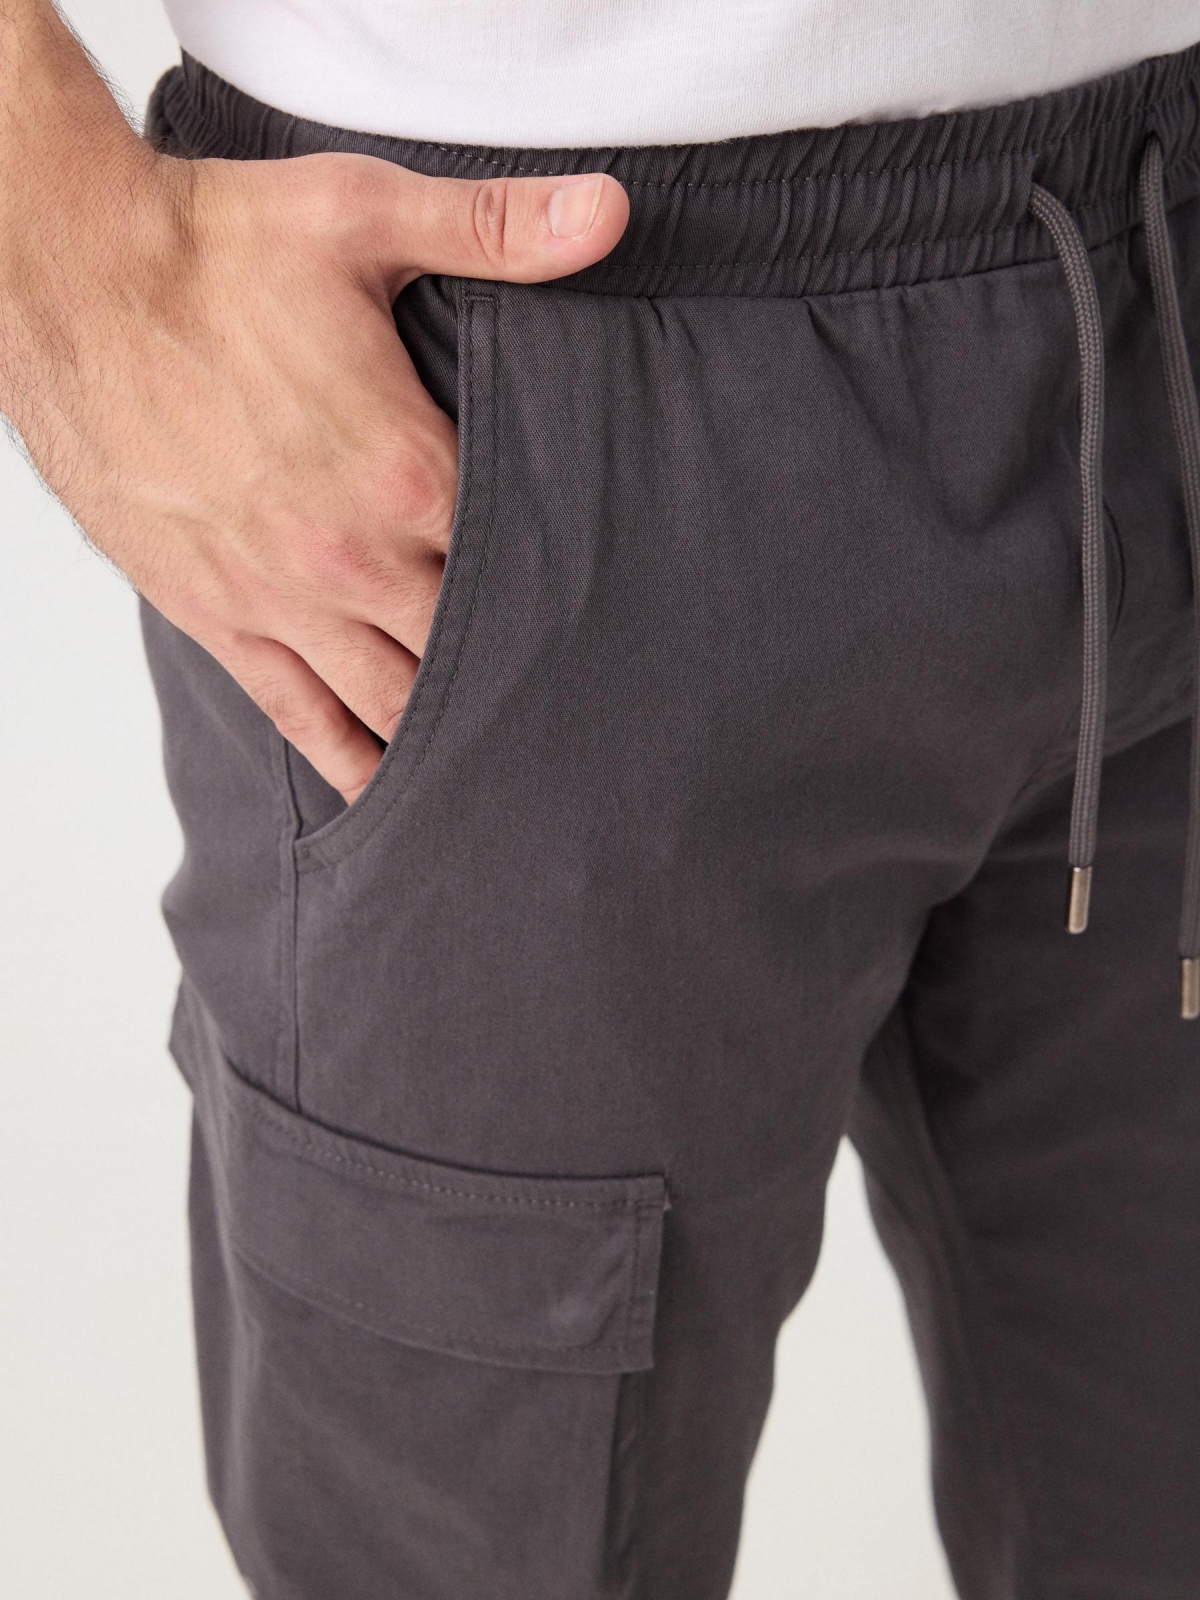 Adjustable cargo joggers grey detail view